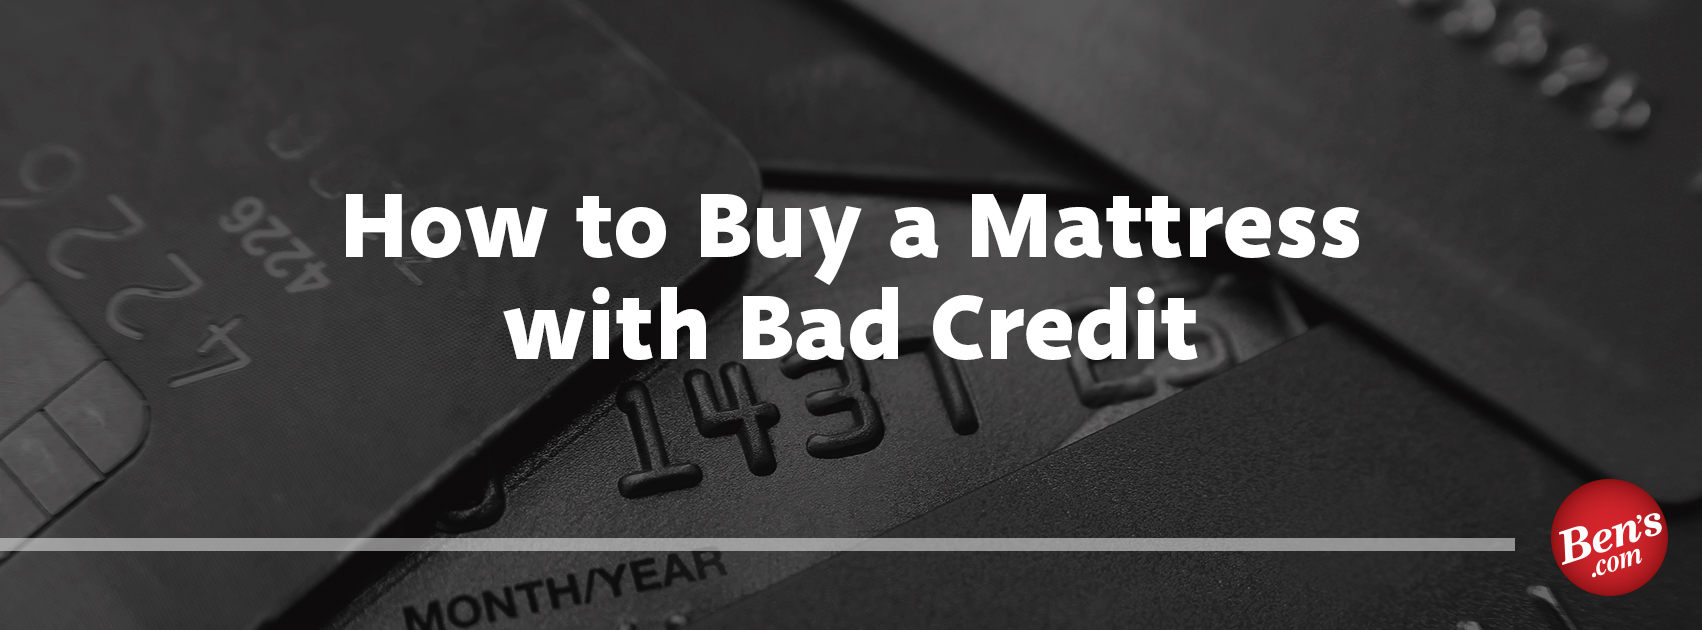 December (5) _ How to Buy a Mattress with Bad Credit